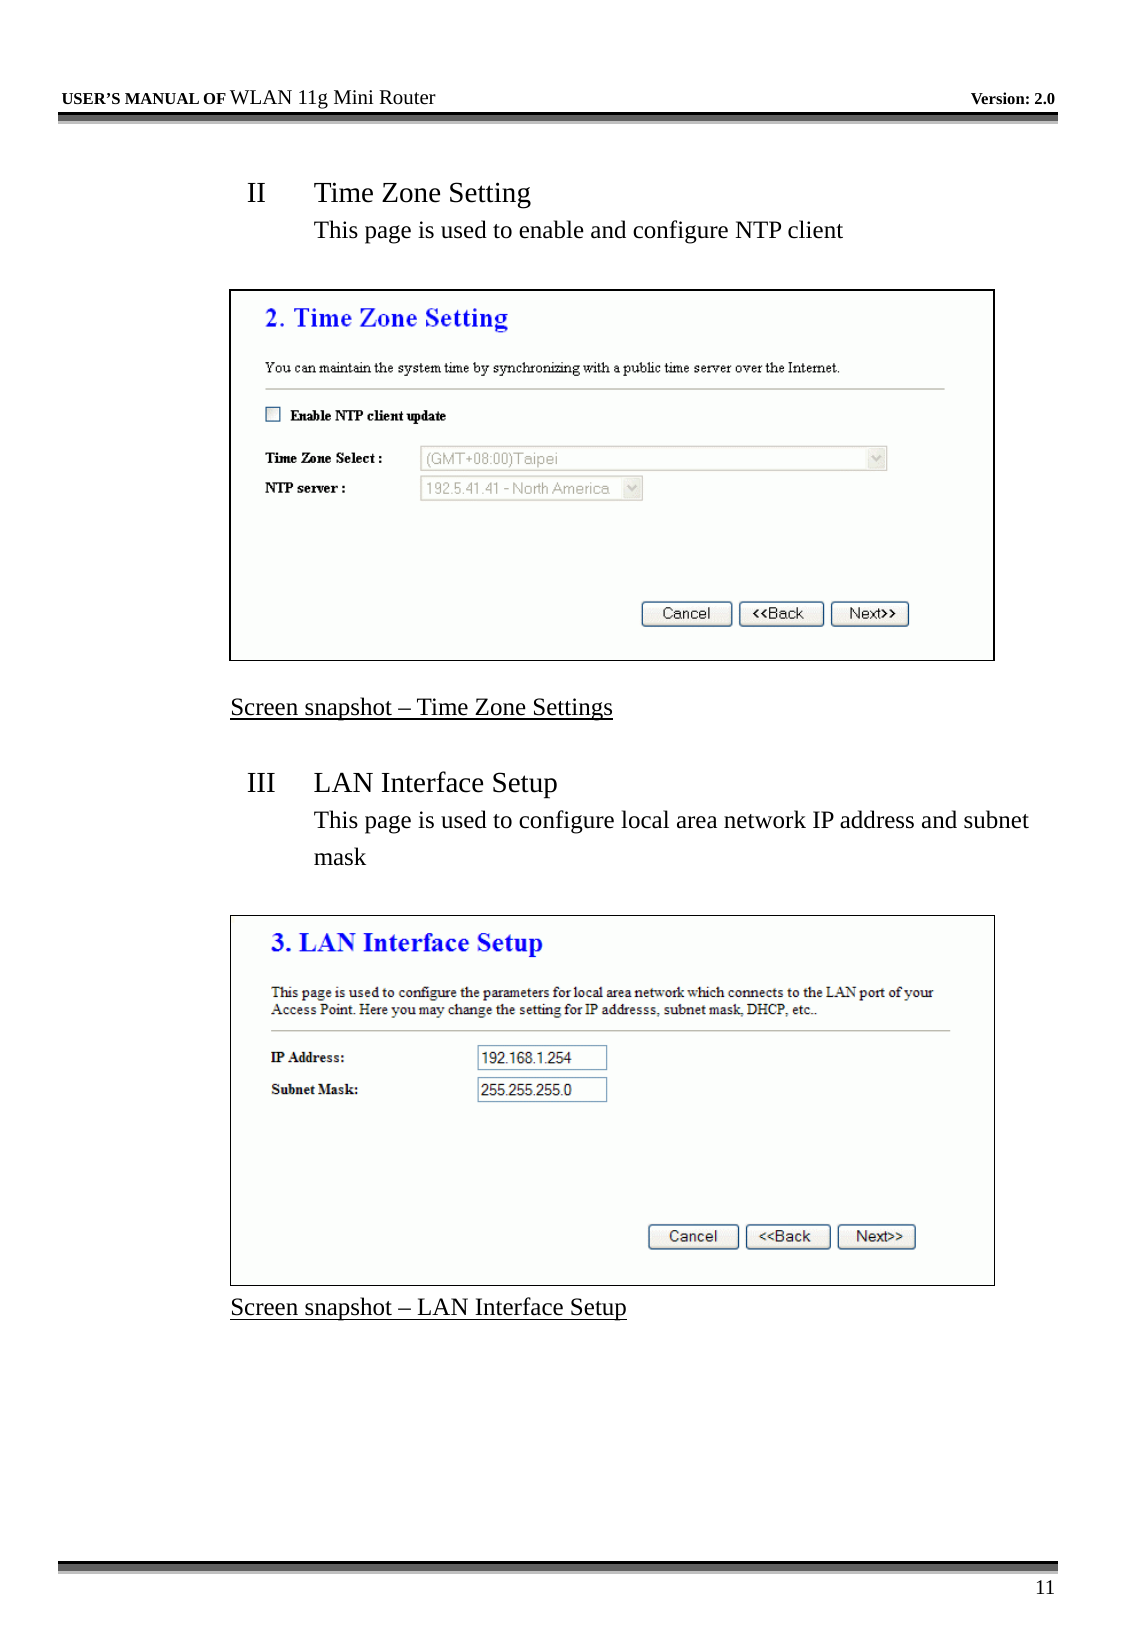   USER’S MANUAL OF WLAN 11g Mini Router   Version: 2.0     11  II  Time Zone Setting This page is used to enable and configure NTP client   Screen snapshot – Time Zone Settings  III  LAN Interface Setup This page is used to configure local area network IP address and subnet mask   Screen snapshot – LAN Interface Setup  